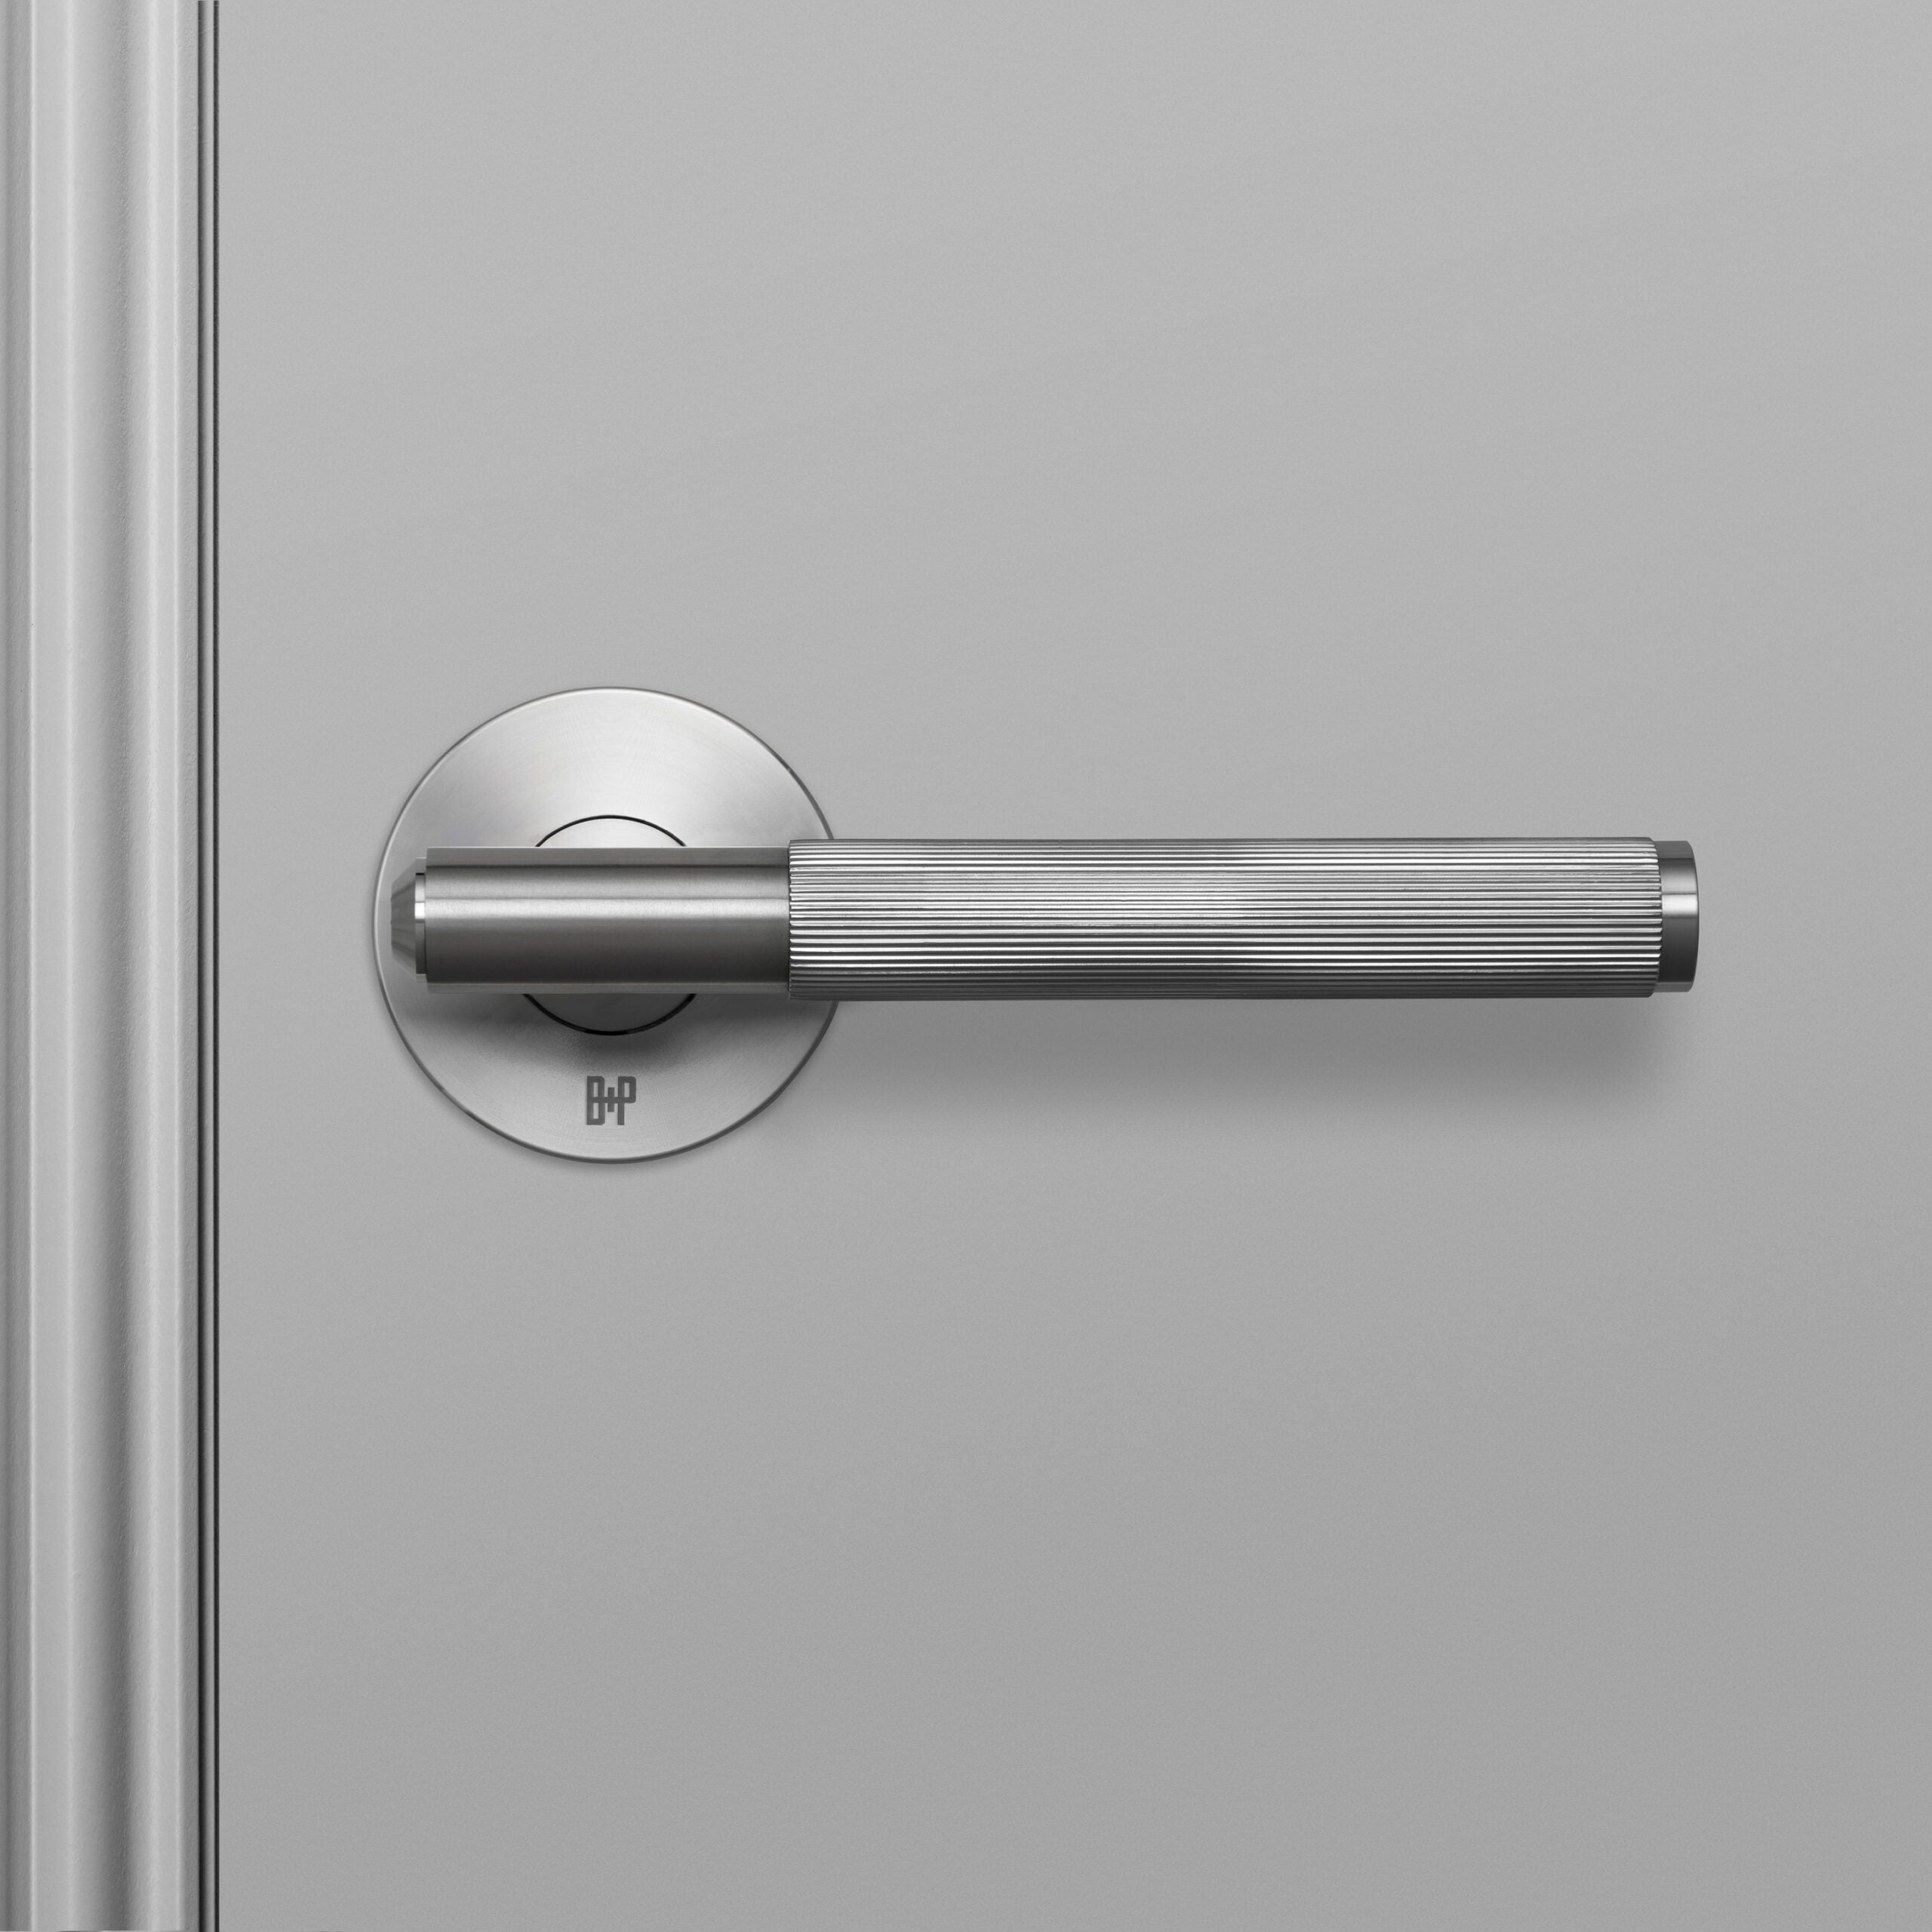 Buster + Punch Conventional Door Handle, Linear Design - FIXED TYPE Hardware Buster + Punch Steel  